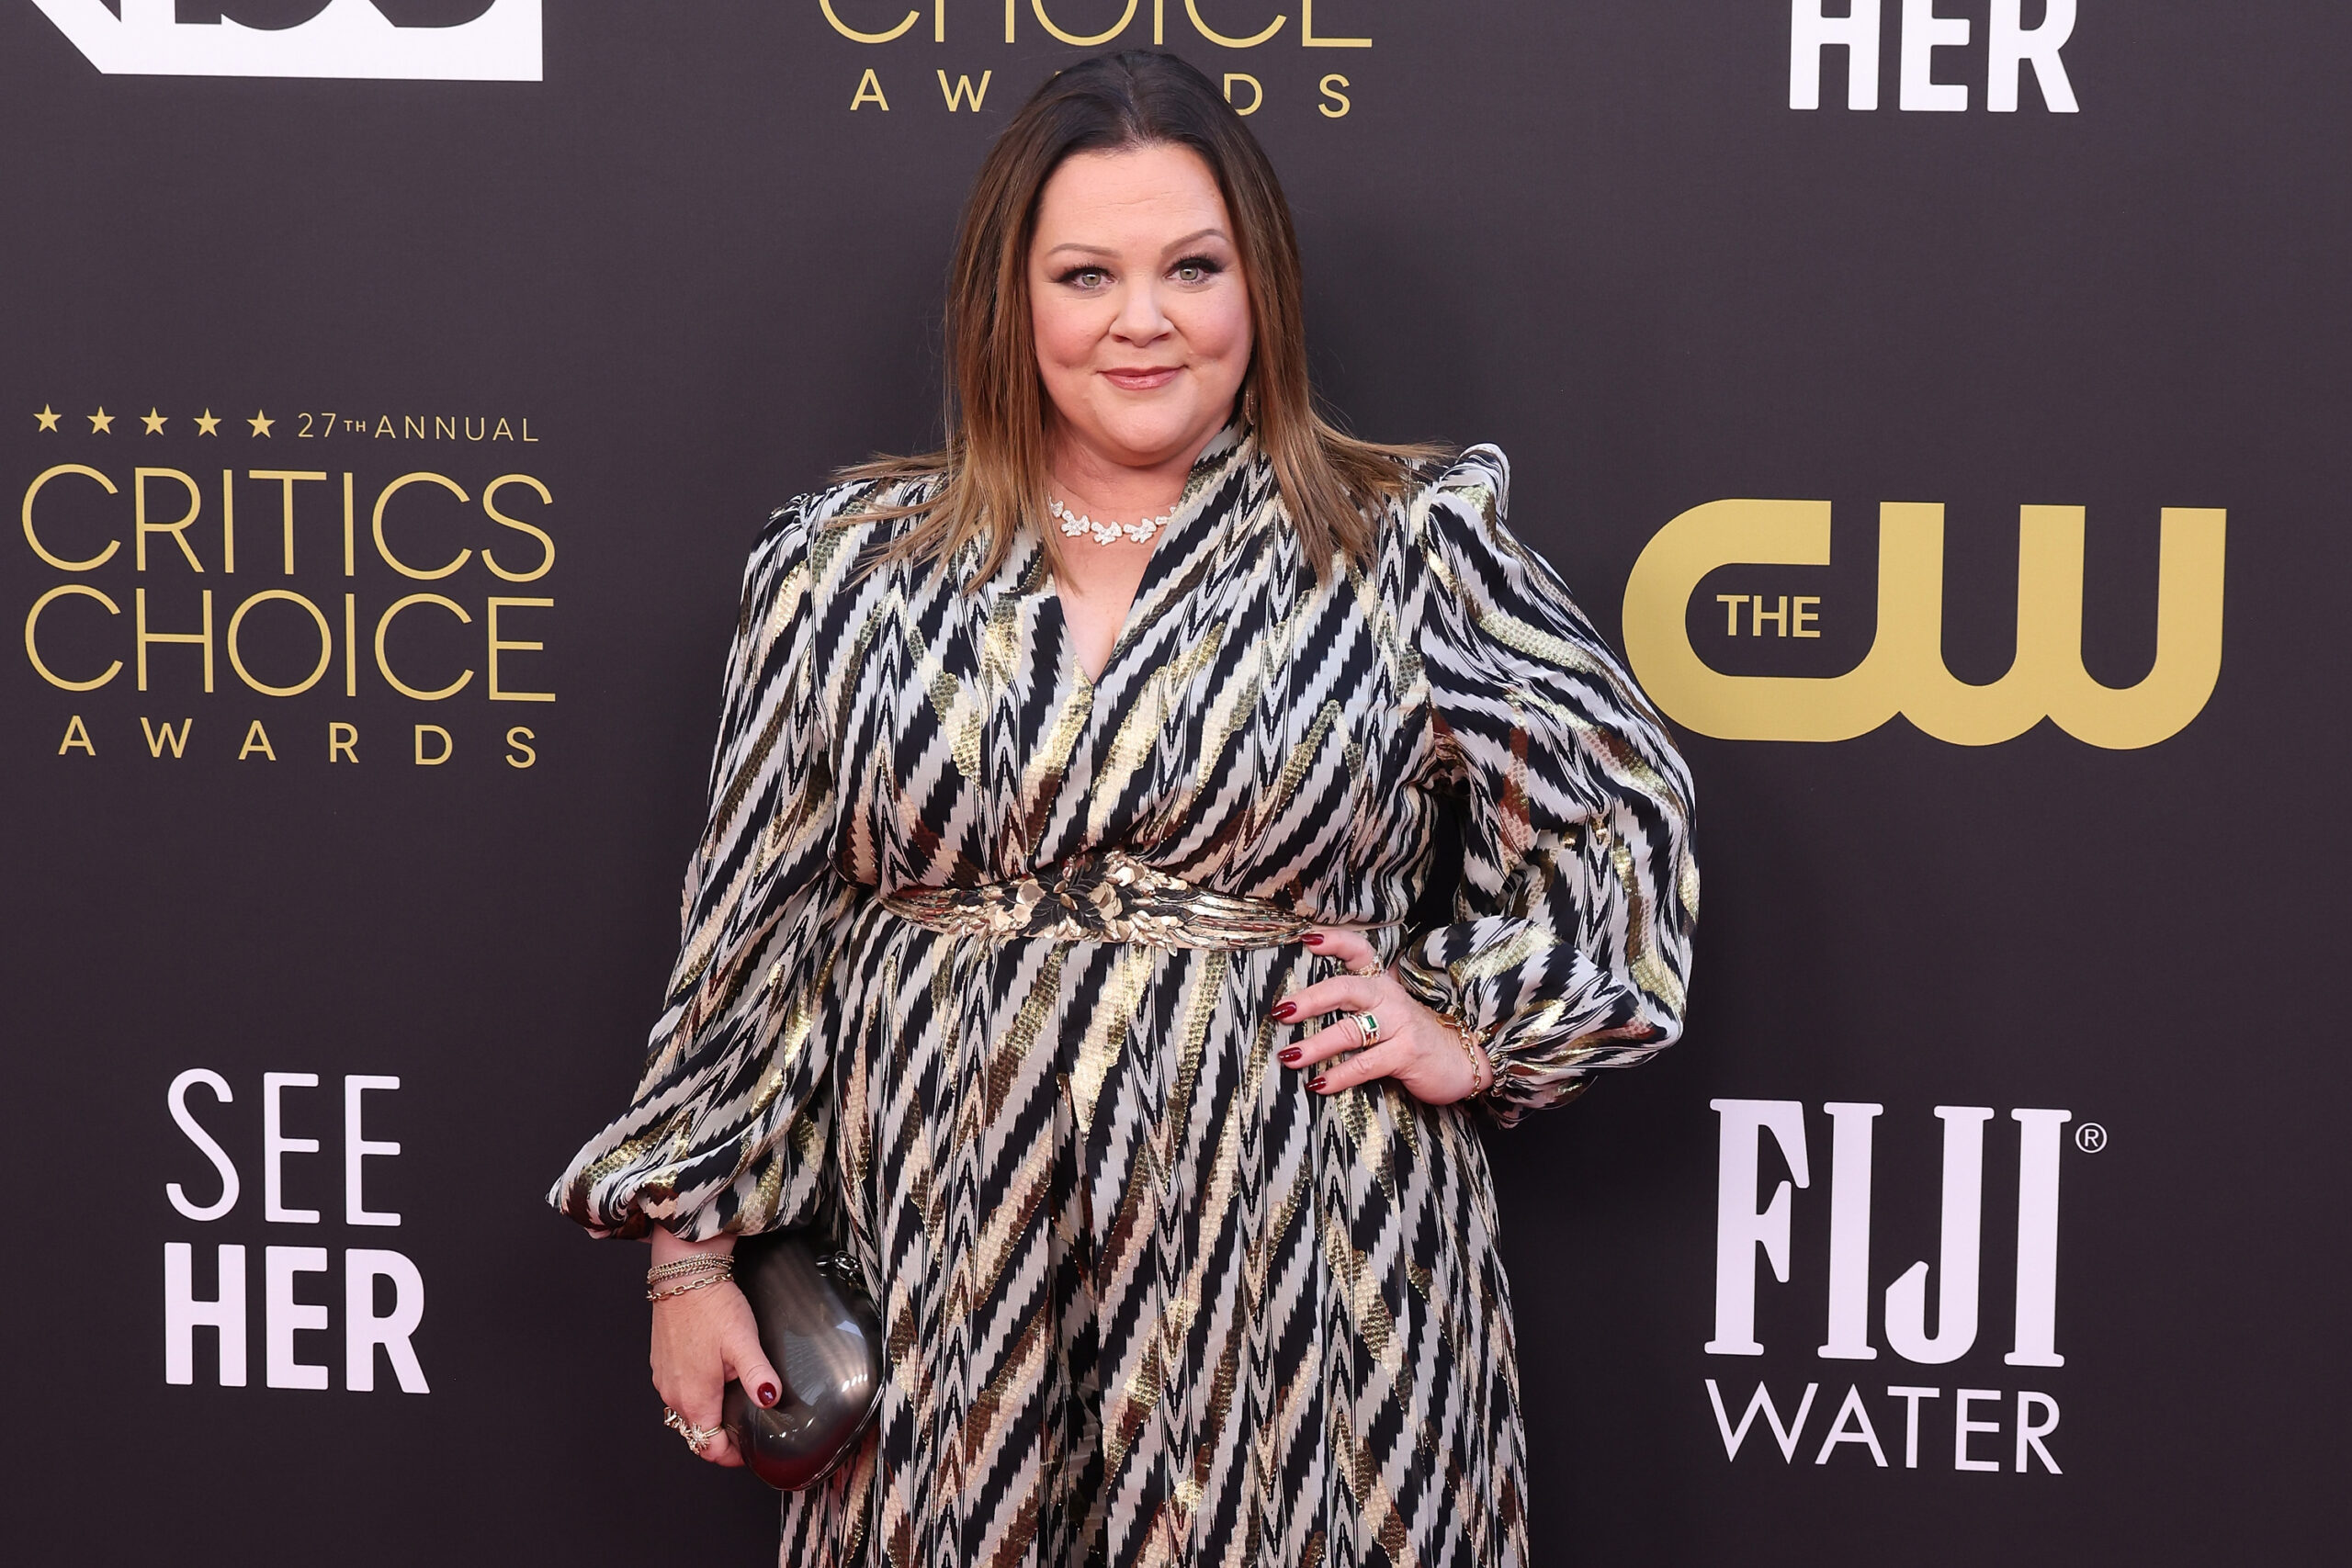 Melissa McCarthy at the 27th Annual Critics Choice Awards in Los Angeles, California on March 13, 2022 | Source: Getty Images